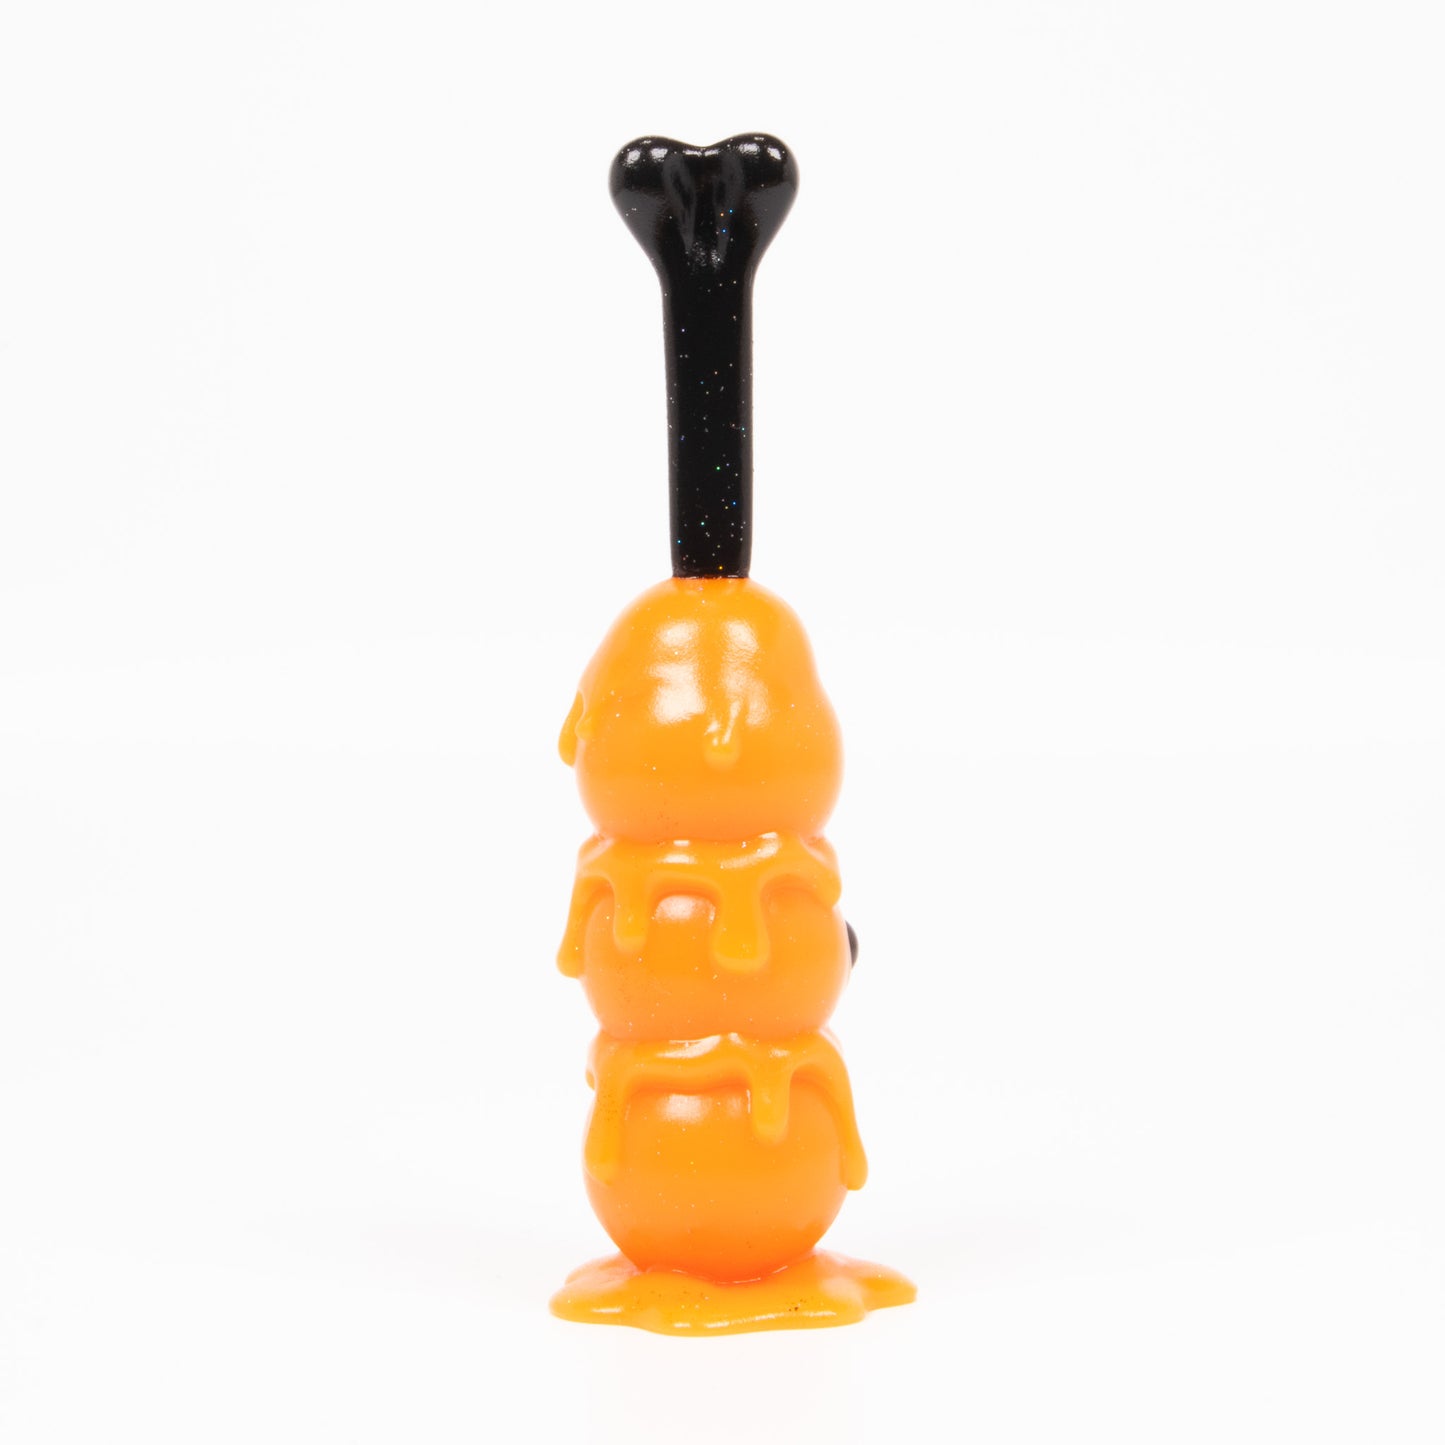 Dreadful Drumstick - This is Drumstick Resin Figure